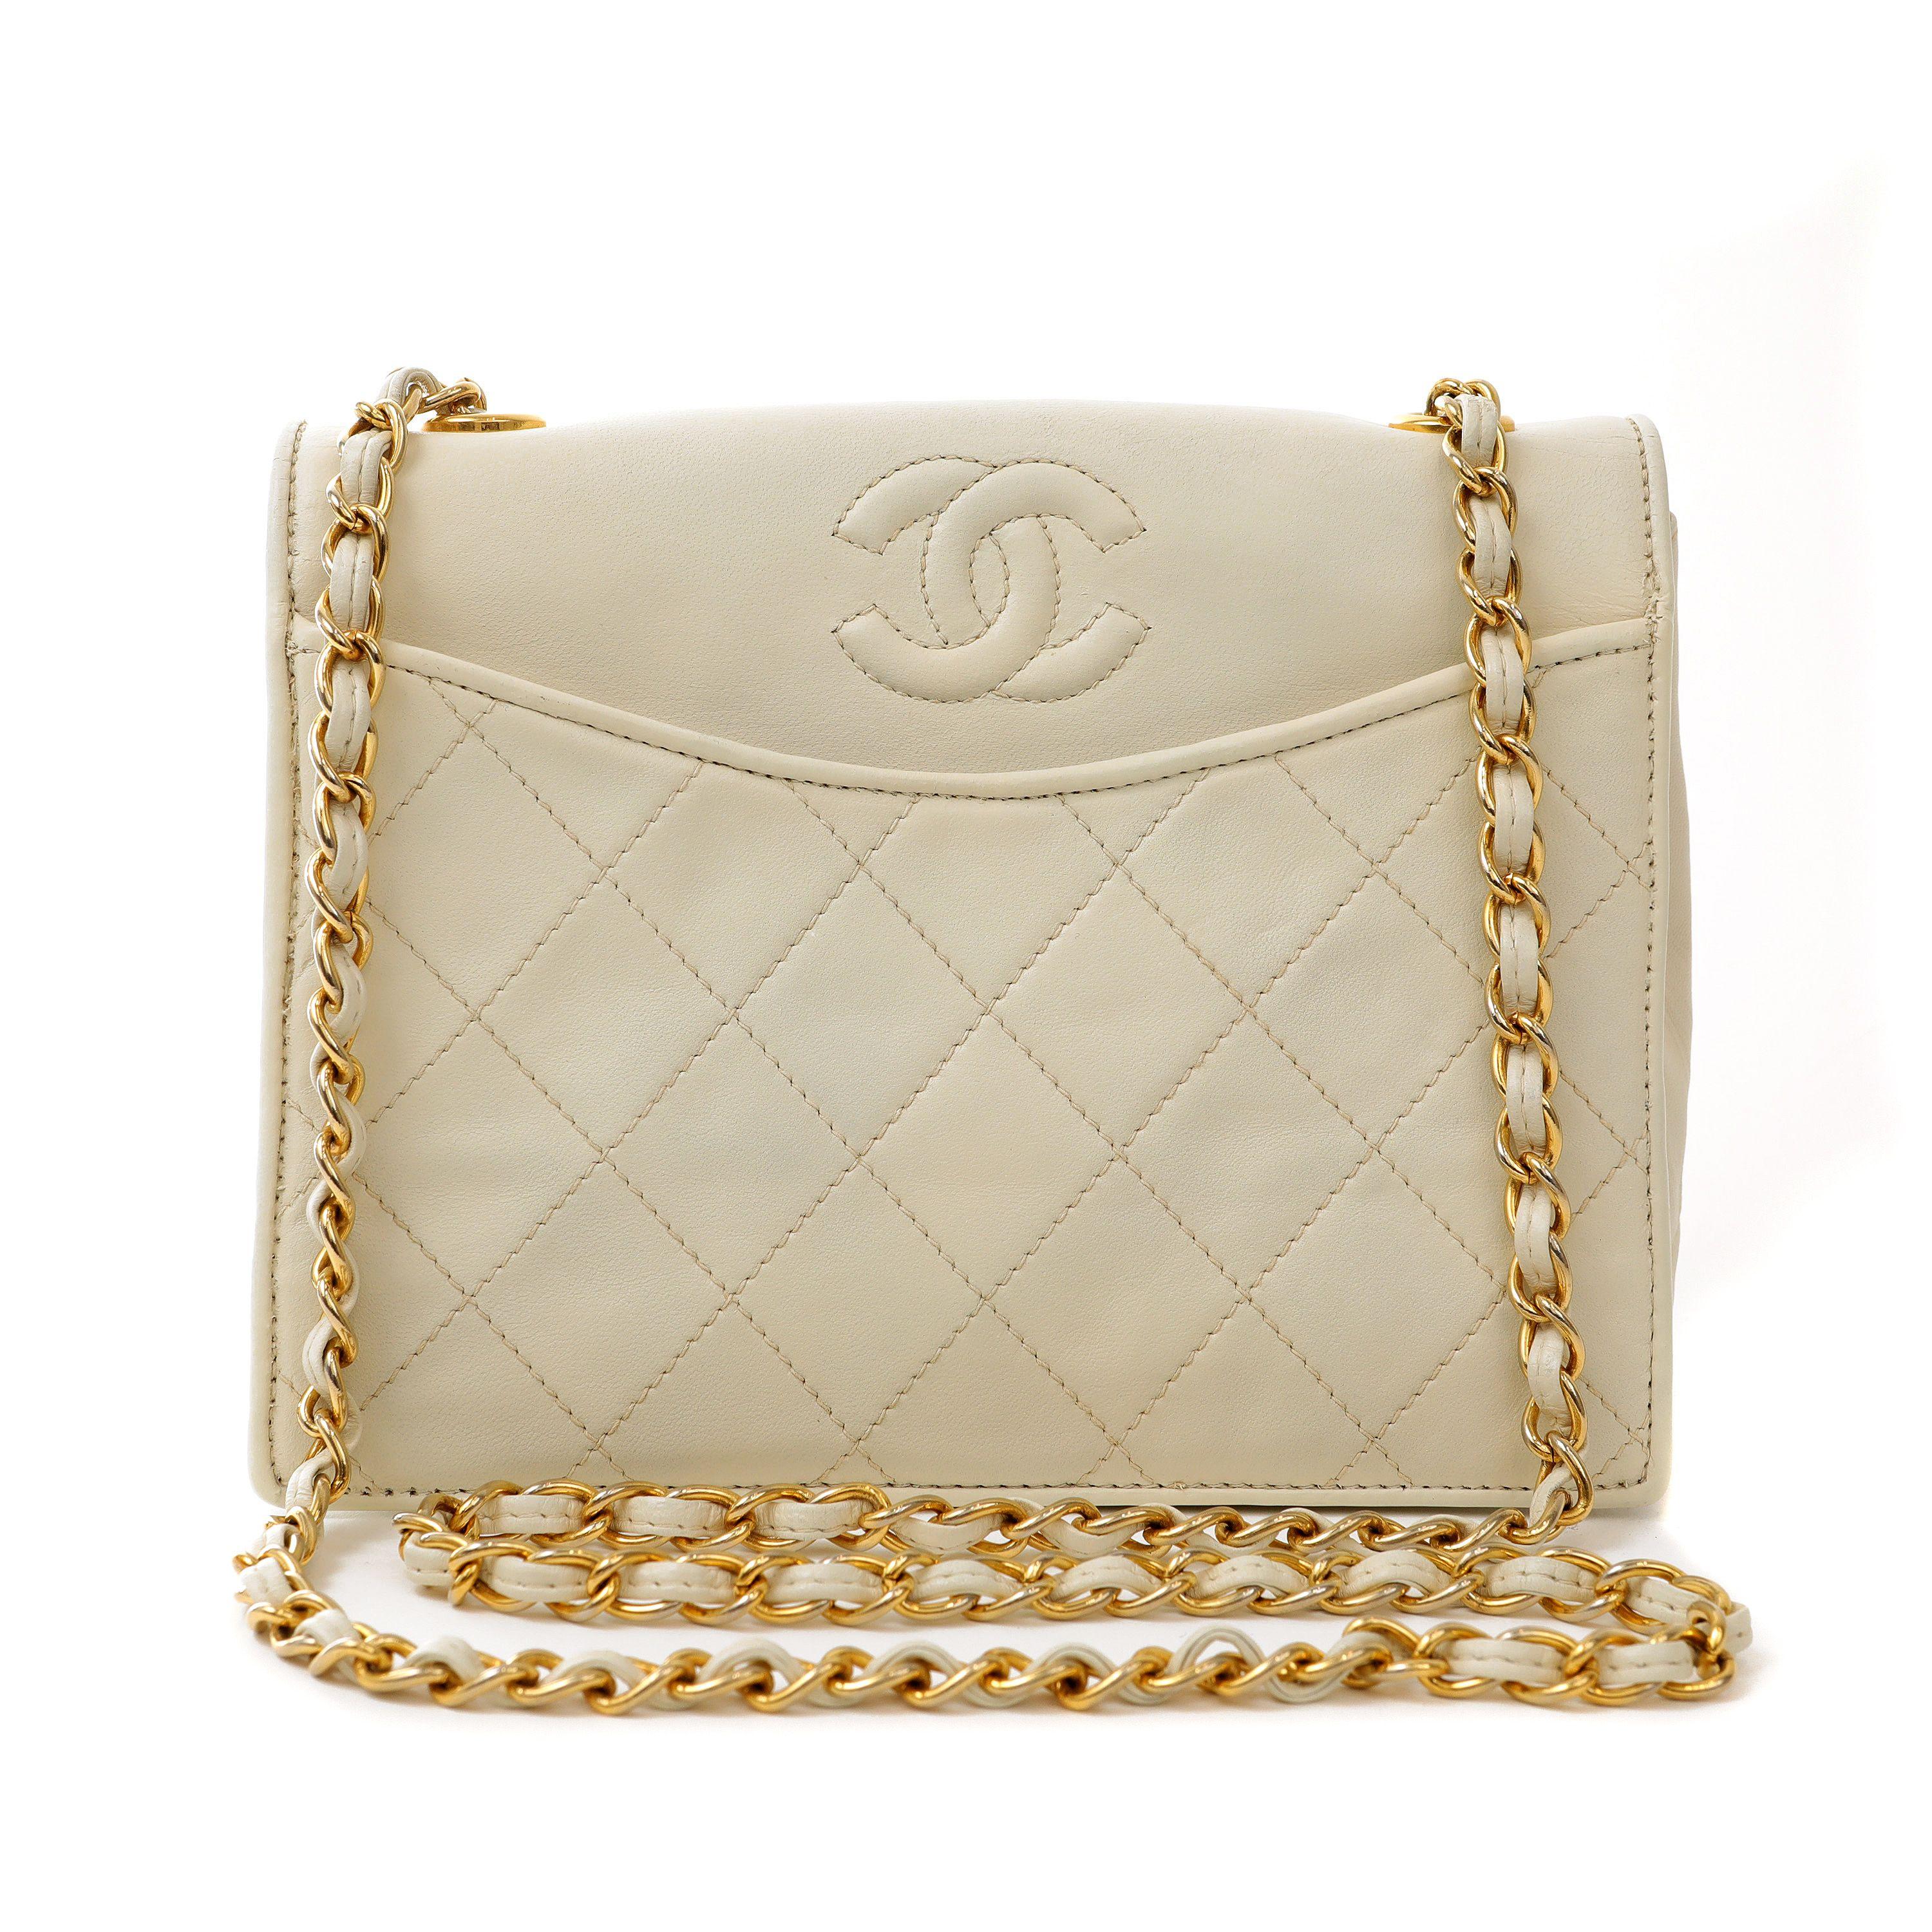 Women's Chanel Vintage Ivory Lambskin Crossbody Bag with Gold Hardware For Sale